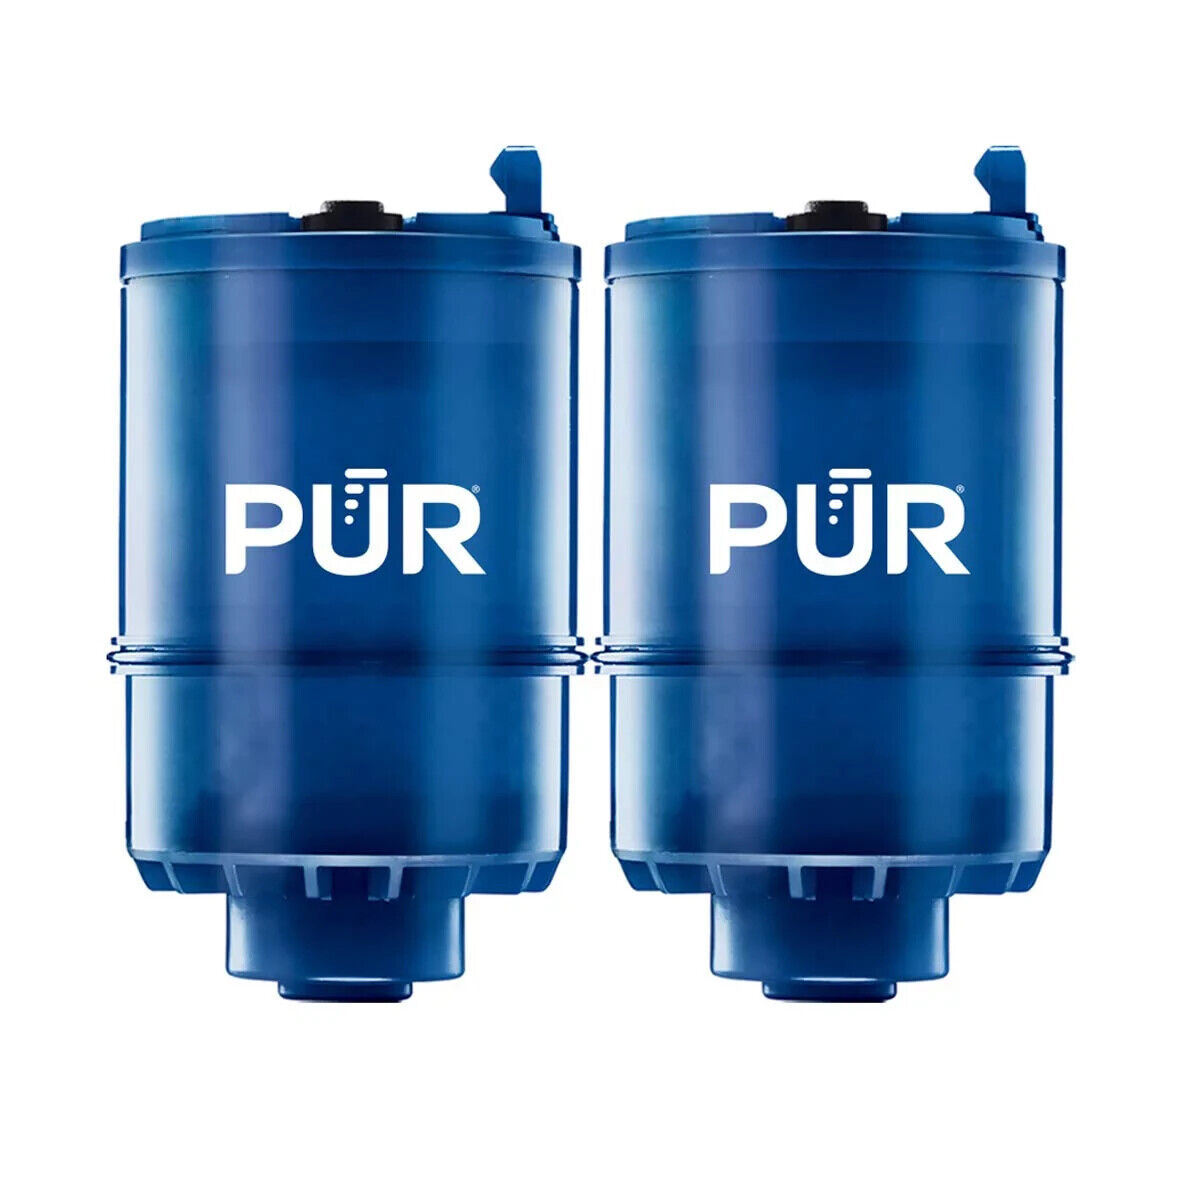 PUR Plus RF-9999 Great Taste Mineral Core Replacement Faucet Filter - Blue